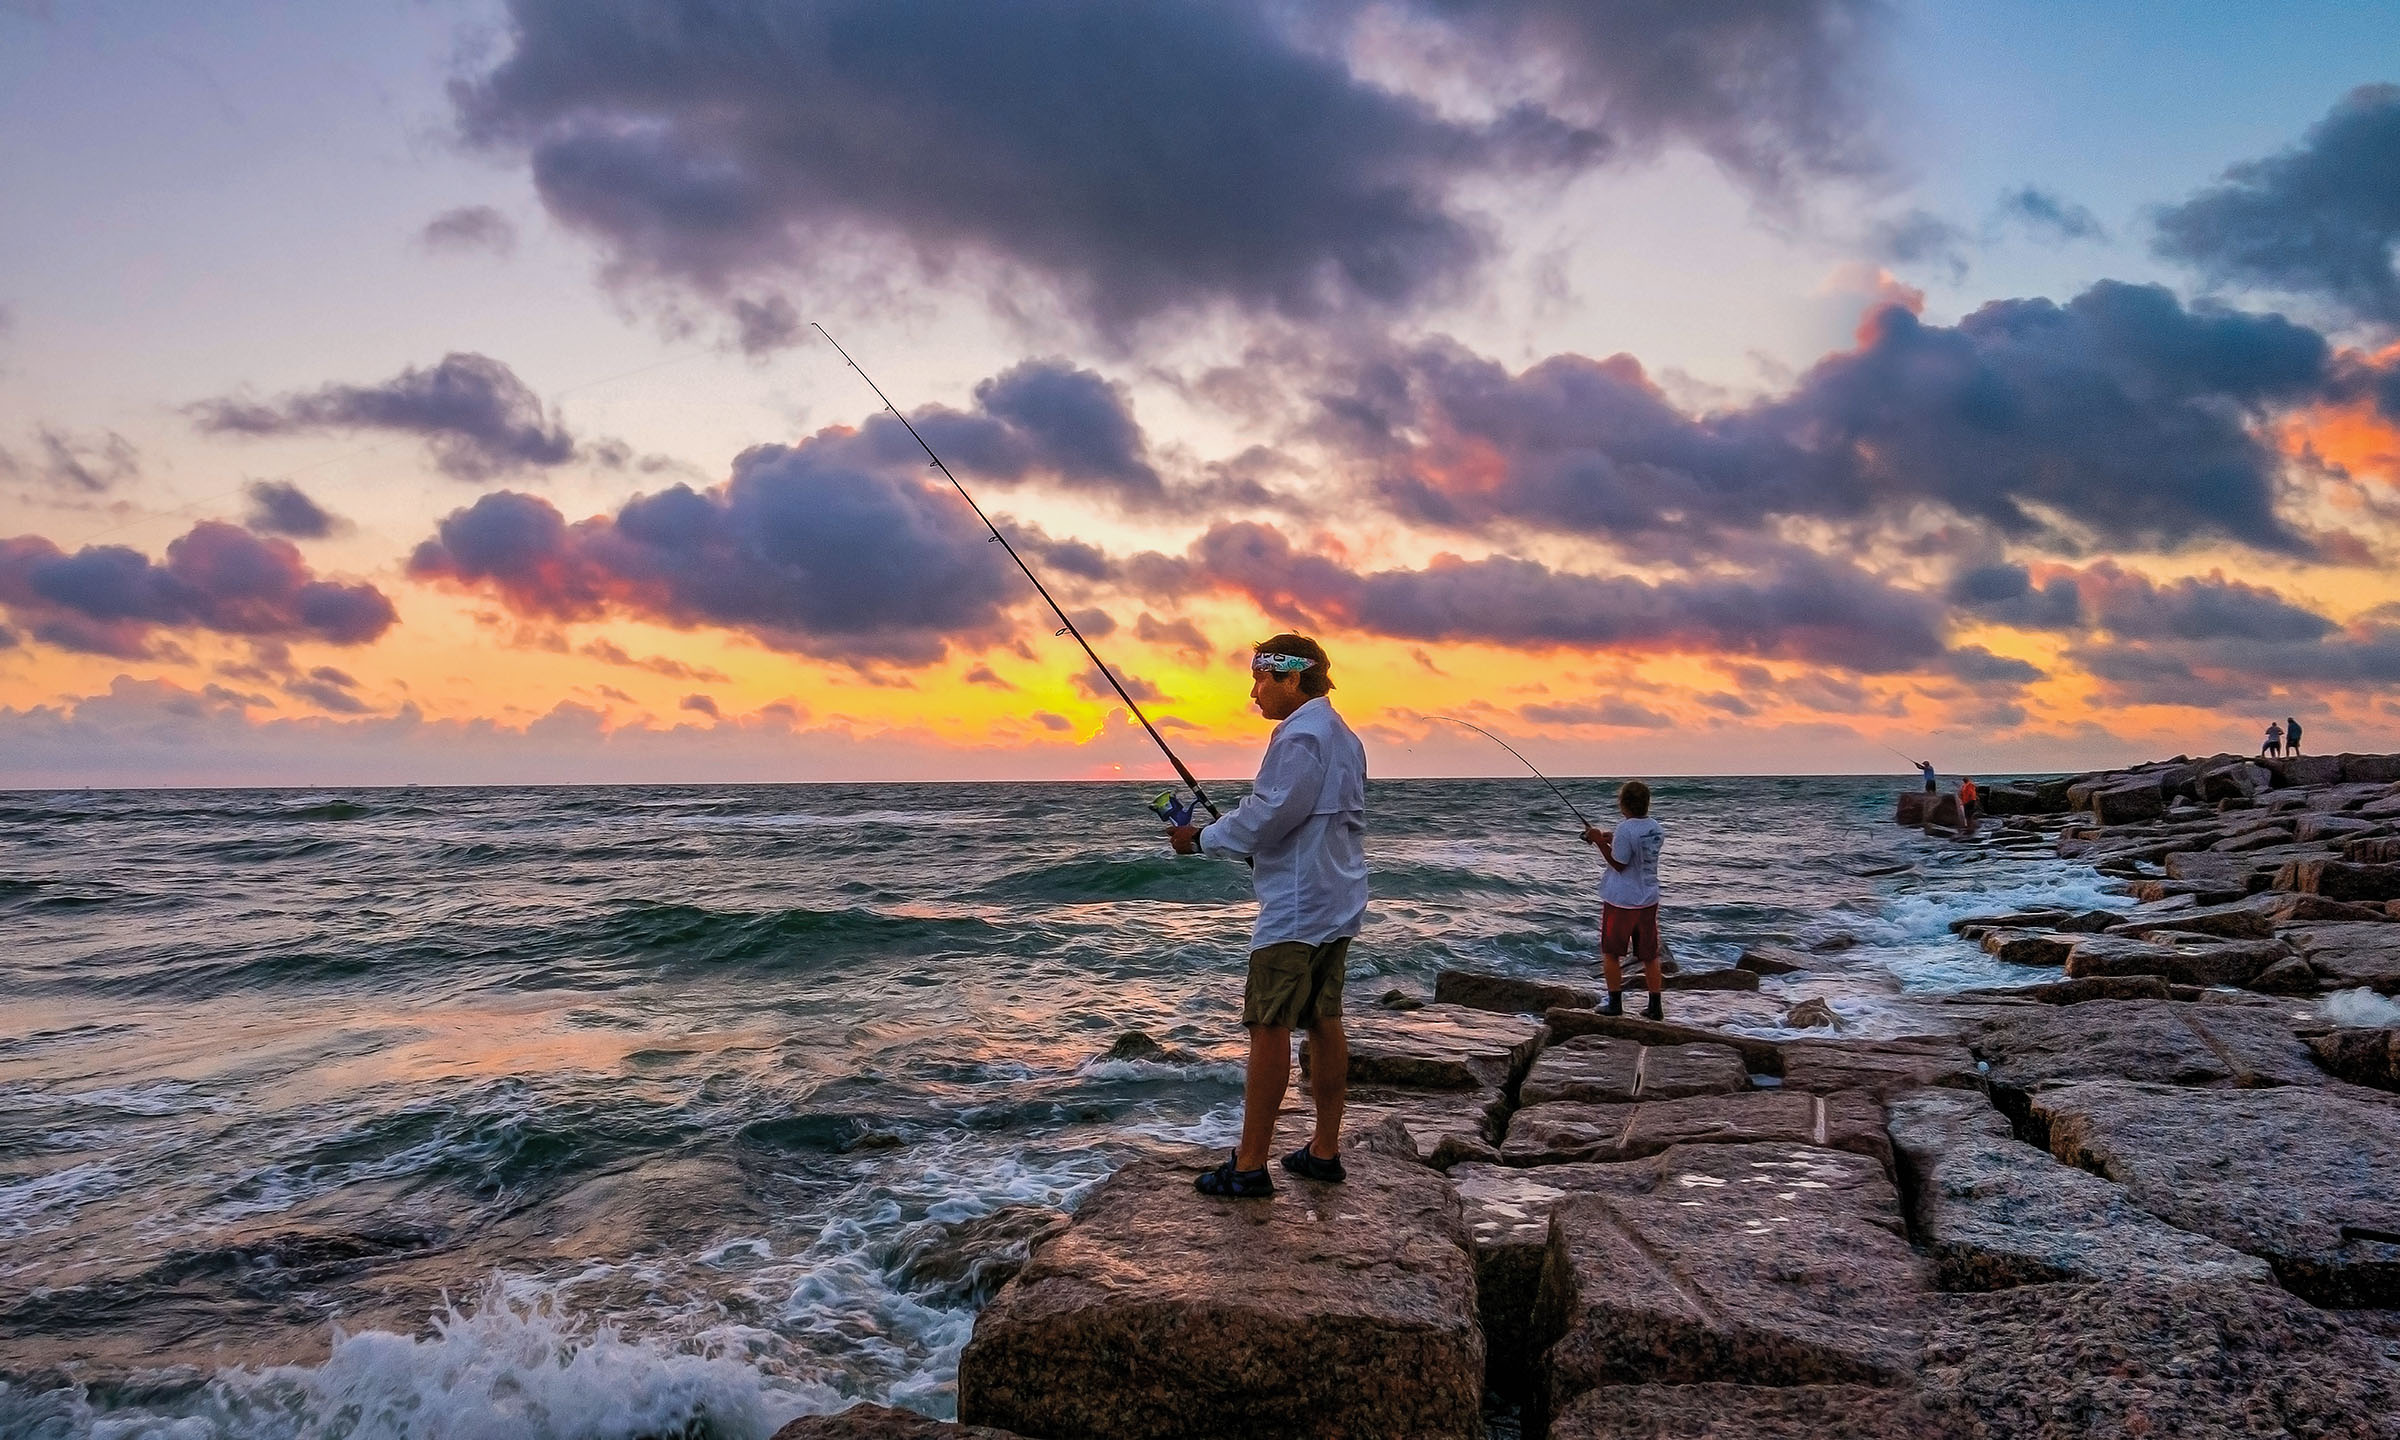 Fishermen cast their lines at sunset on Mustang Island, Texas